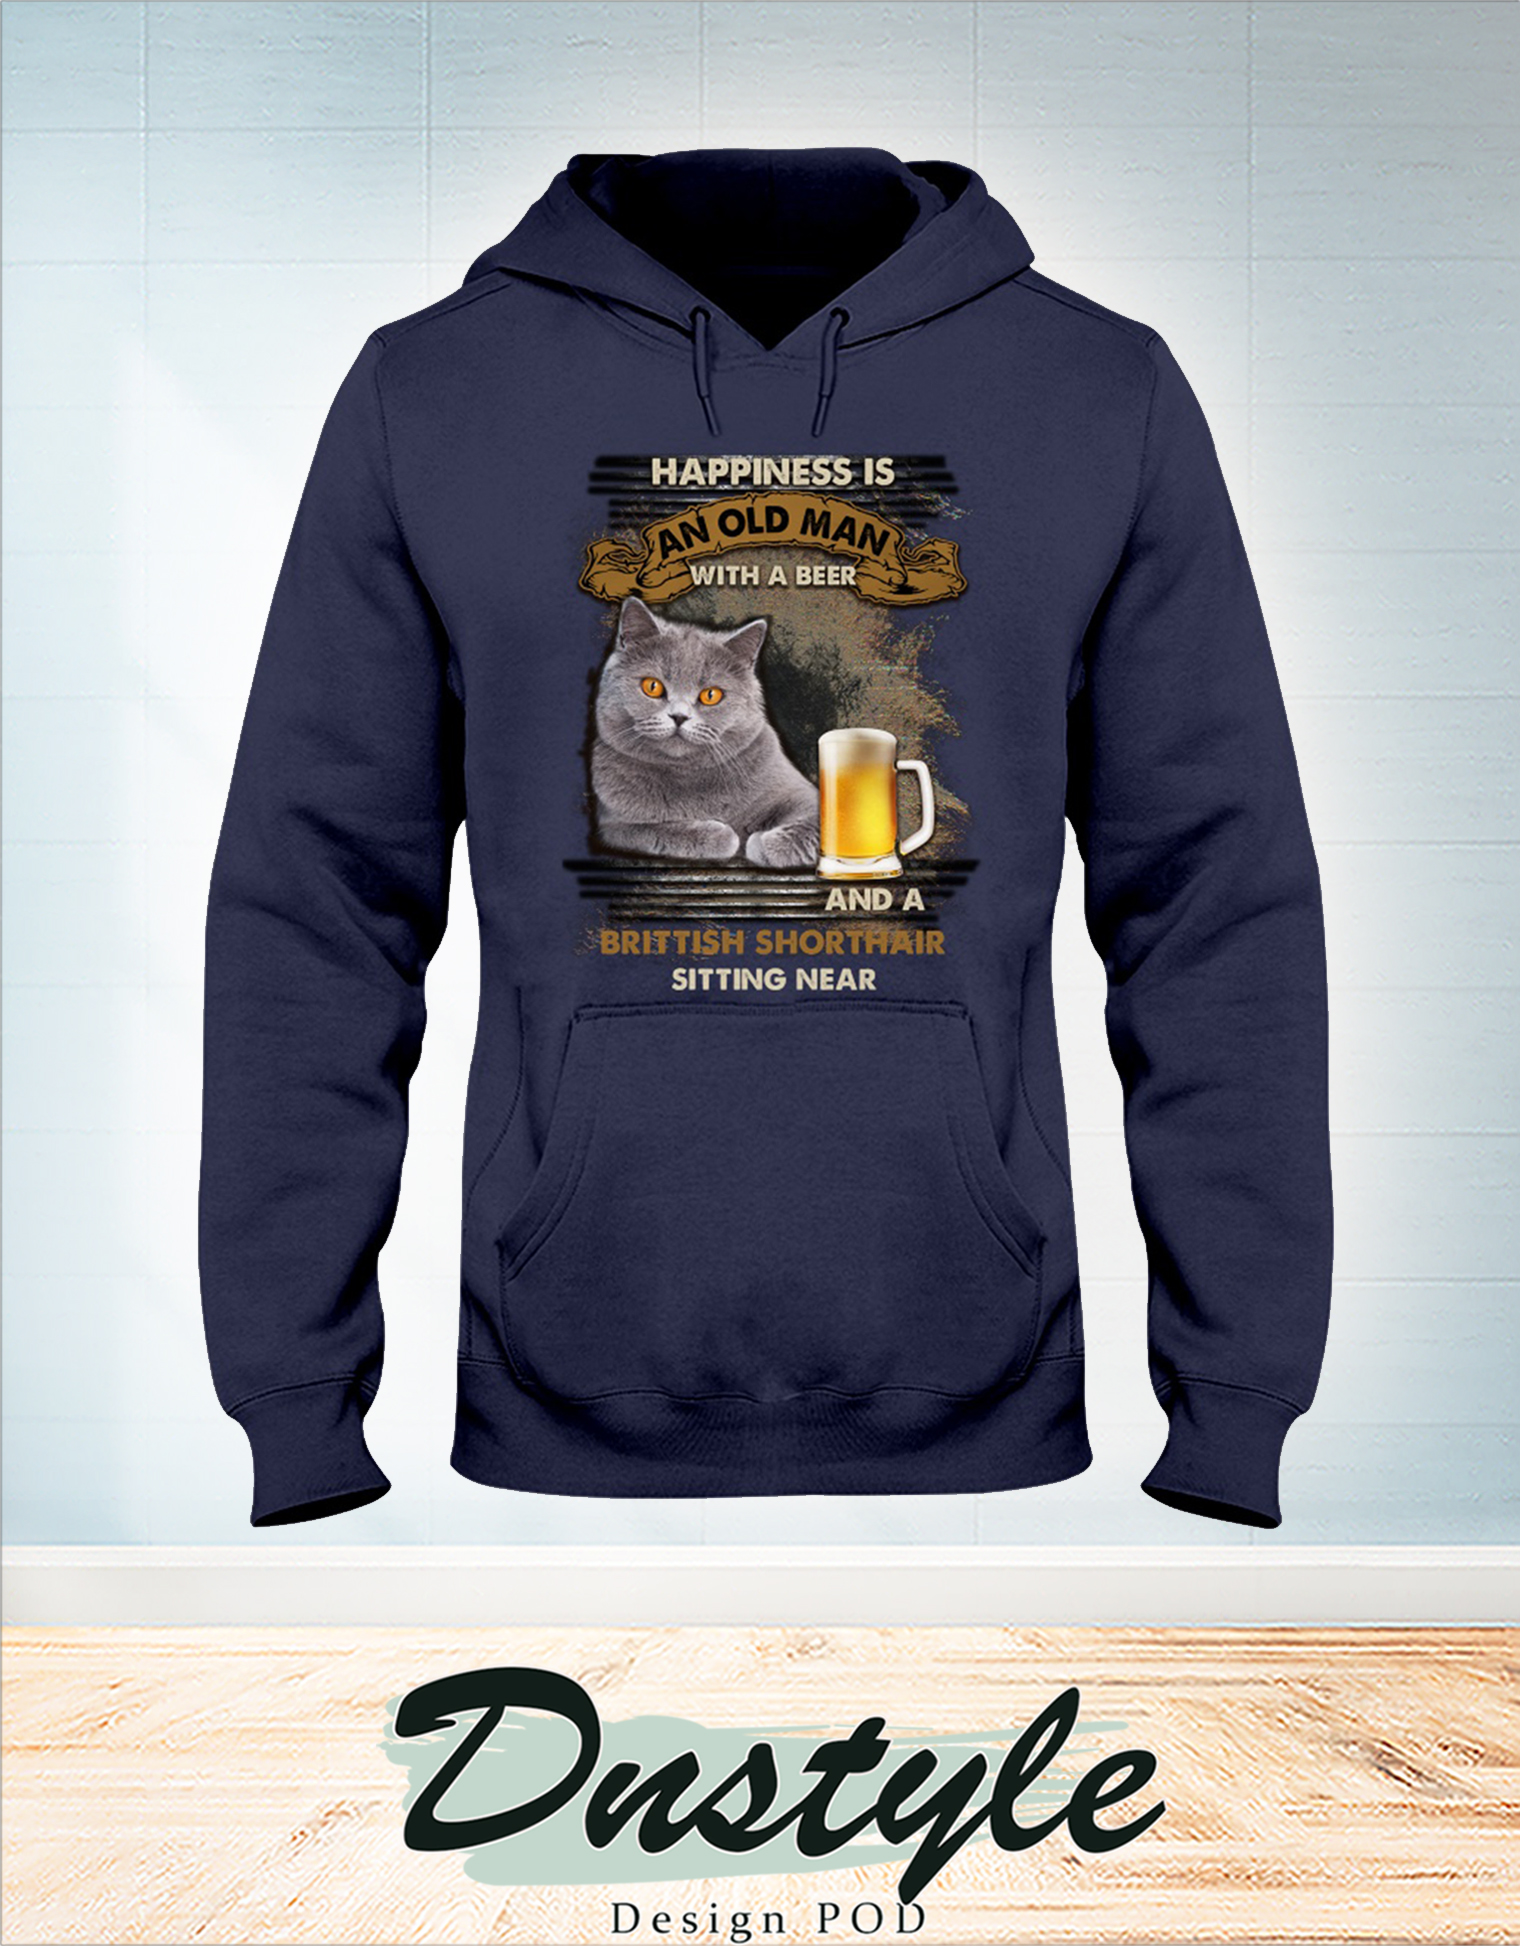 Happiness is an old man with a beer and a Brittish Shorthair sitting near hoodie